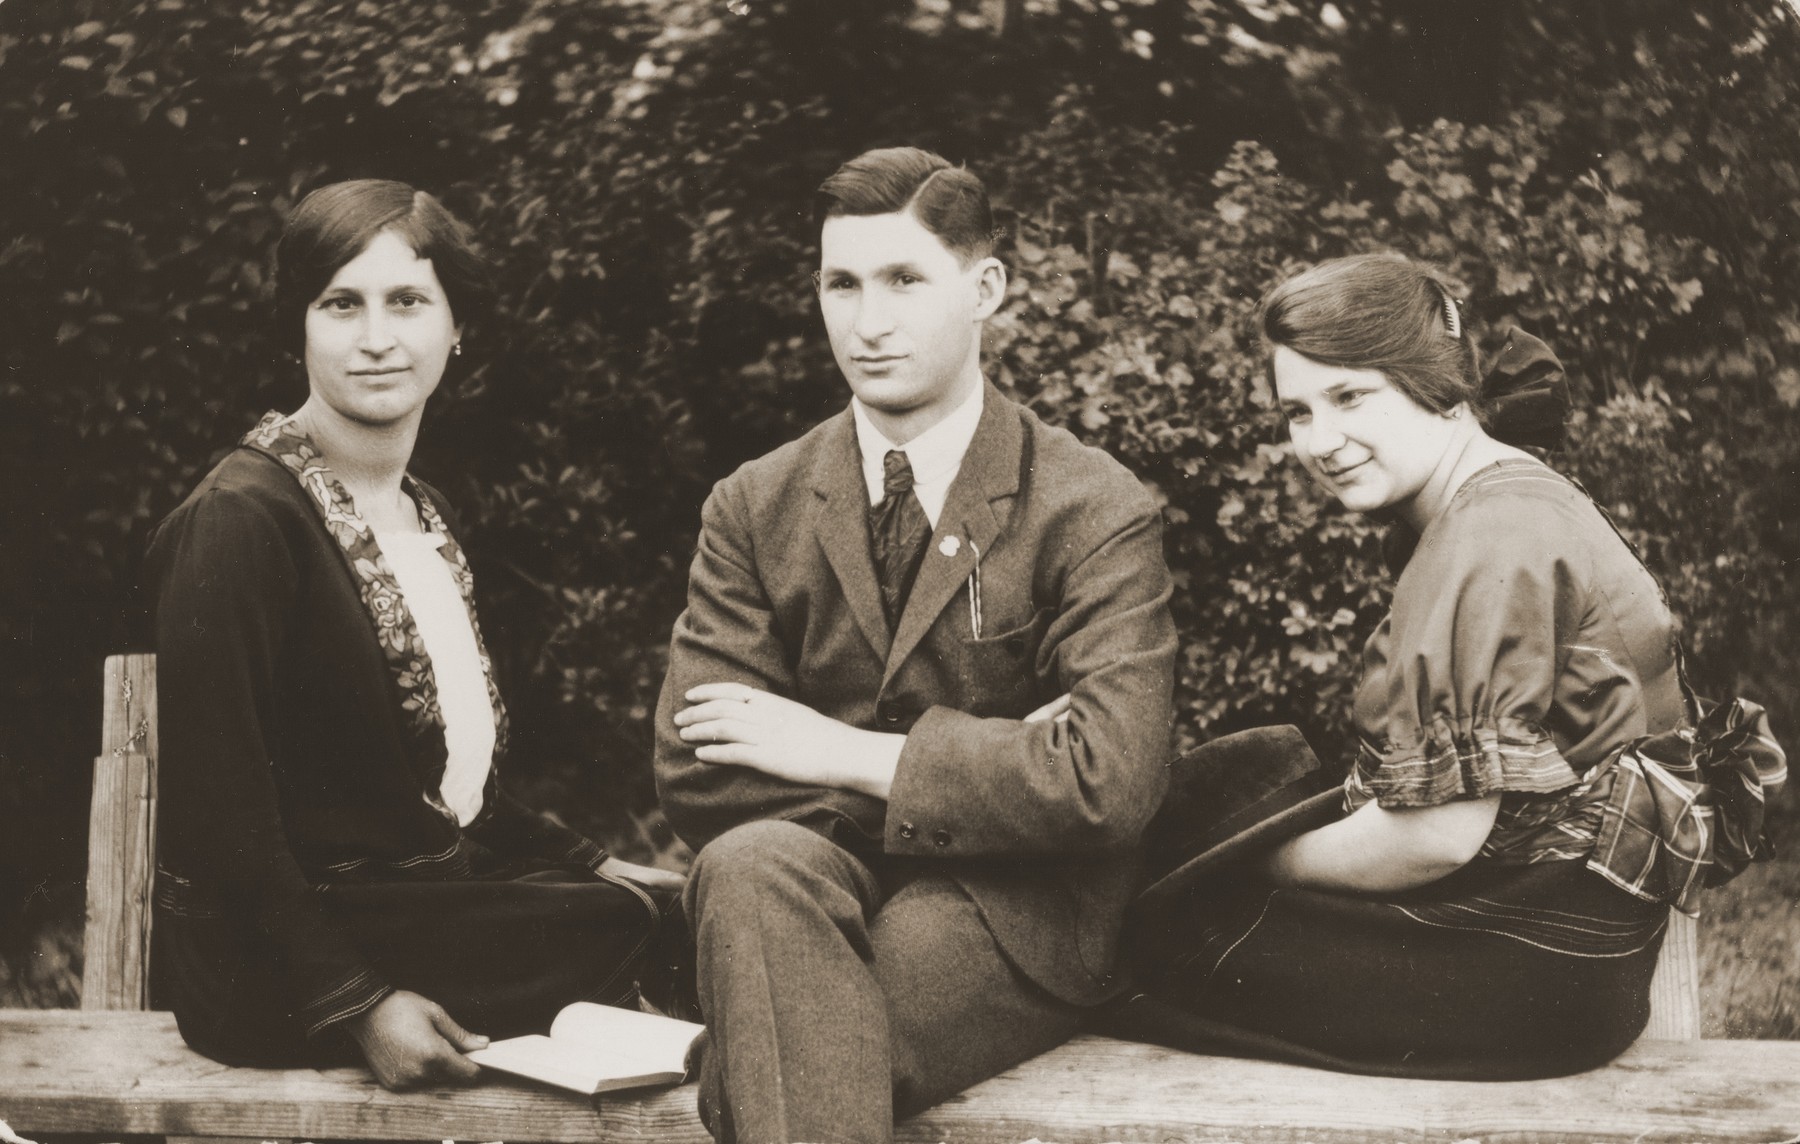 Group portrait of three Jewish siblings in Budapest.

Pictured from left to right are Piri, Andres and Boriska Kupfermann.  They are siblings of the donor's father, Beno Kupfermann.